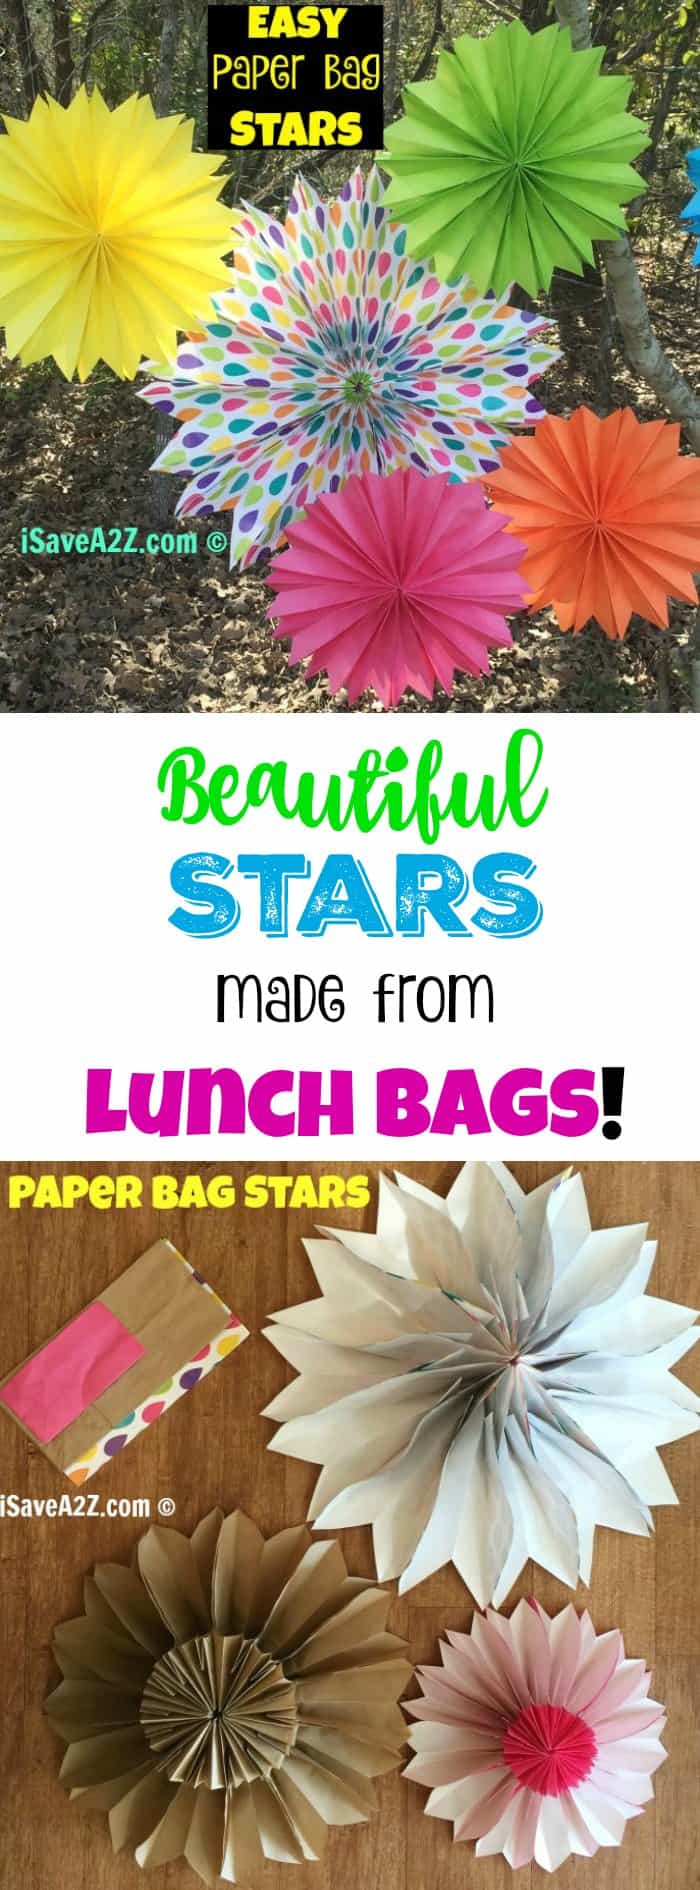 Easy Paper Bag Stars made from lunch bags!! FUN and FAST TO MAKE!